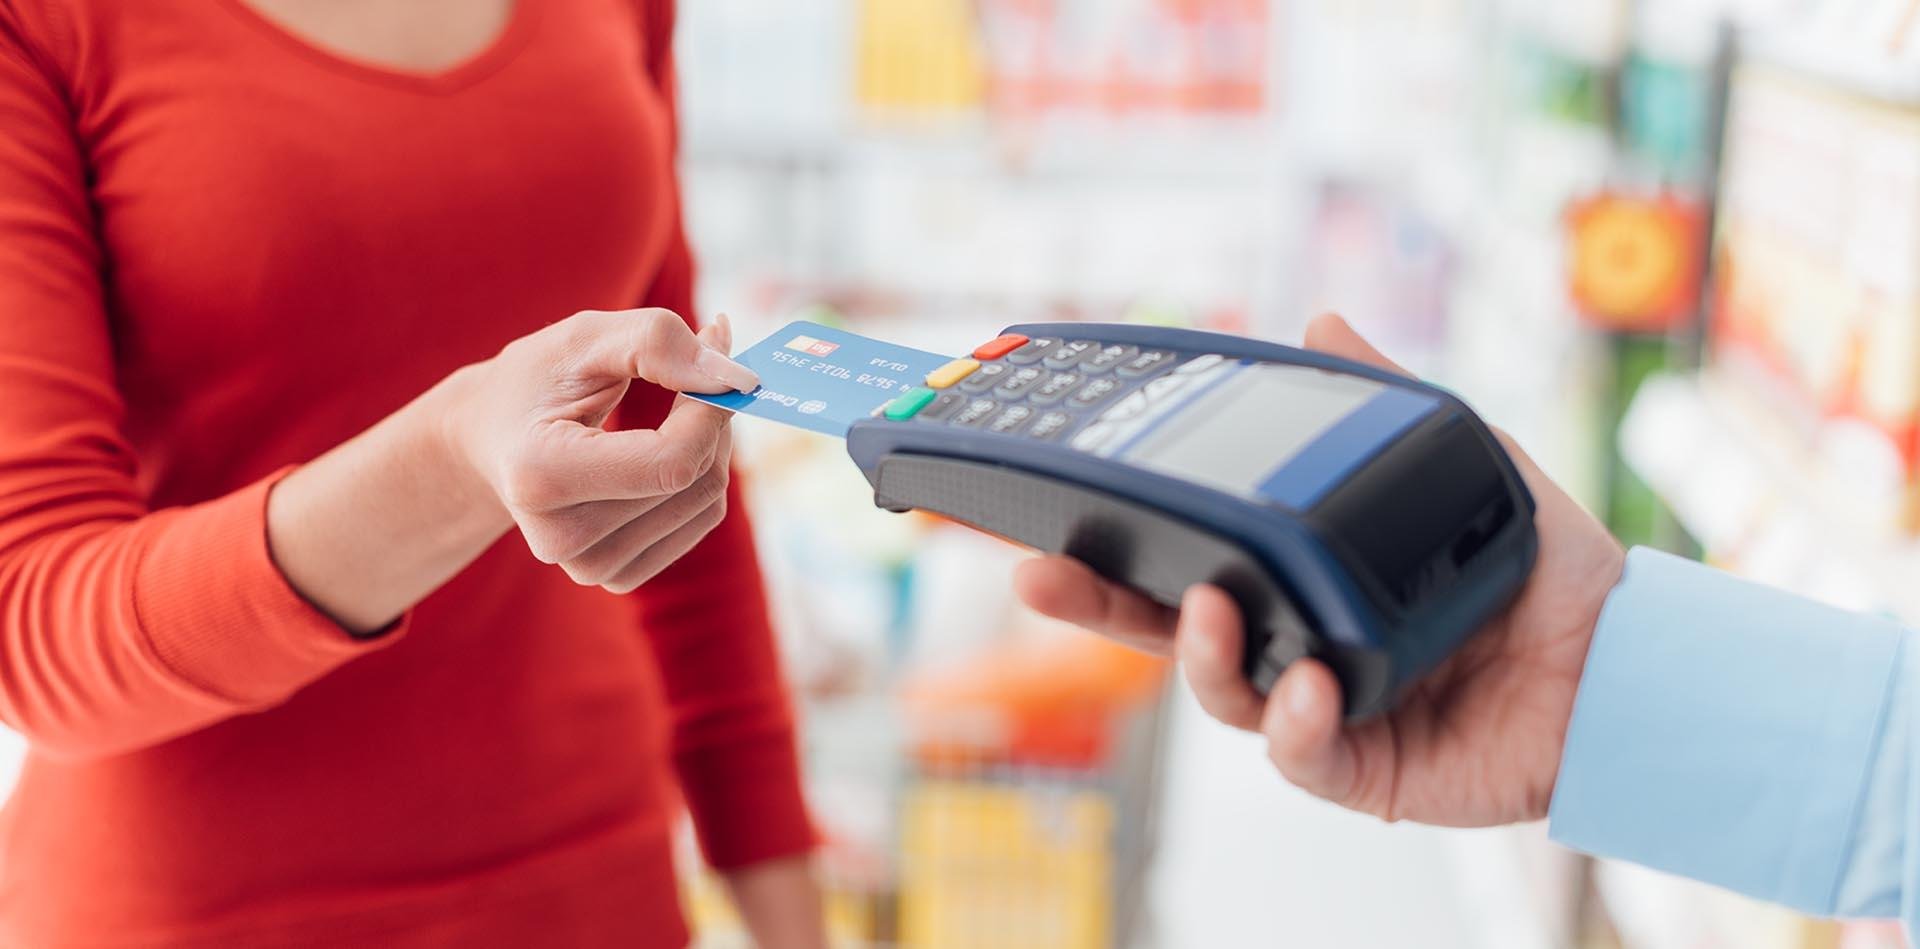 A customer is completing a purchase with her credit card. She confidently hands over her card to the merchant, assured of the pci compliance requirements that protect her credit card transactions. The secure payment environment, maintained by the adherence to the 12 pci compliance requirements set by the pci security standards council, guarantees the safe handling of her sensitive credit card information. The merchant is pci compliant, following the pci standard meticulously to ensure the customer's trust and security. This image perfectly encapsulates the importance of PCI DSS Compliance in every credit card transaction within the payment card industry.